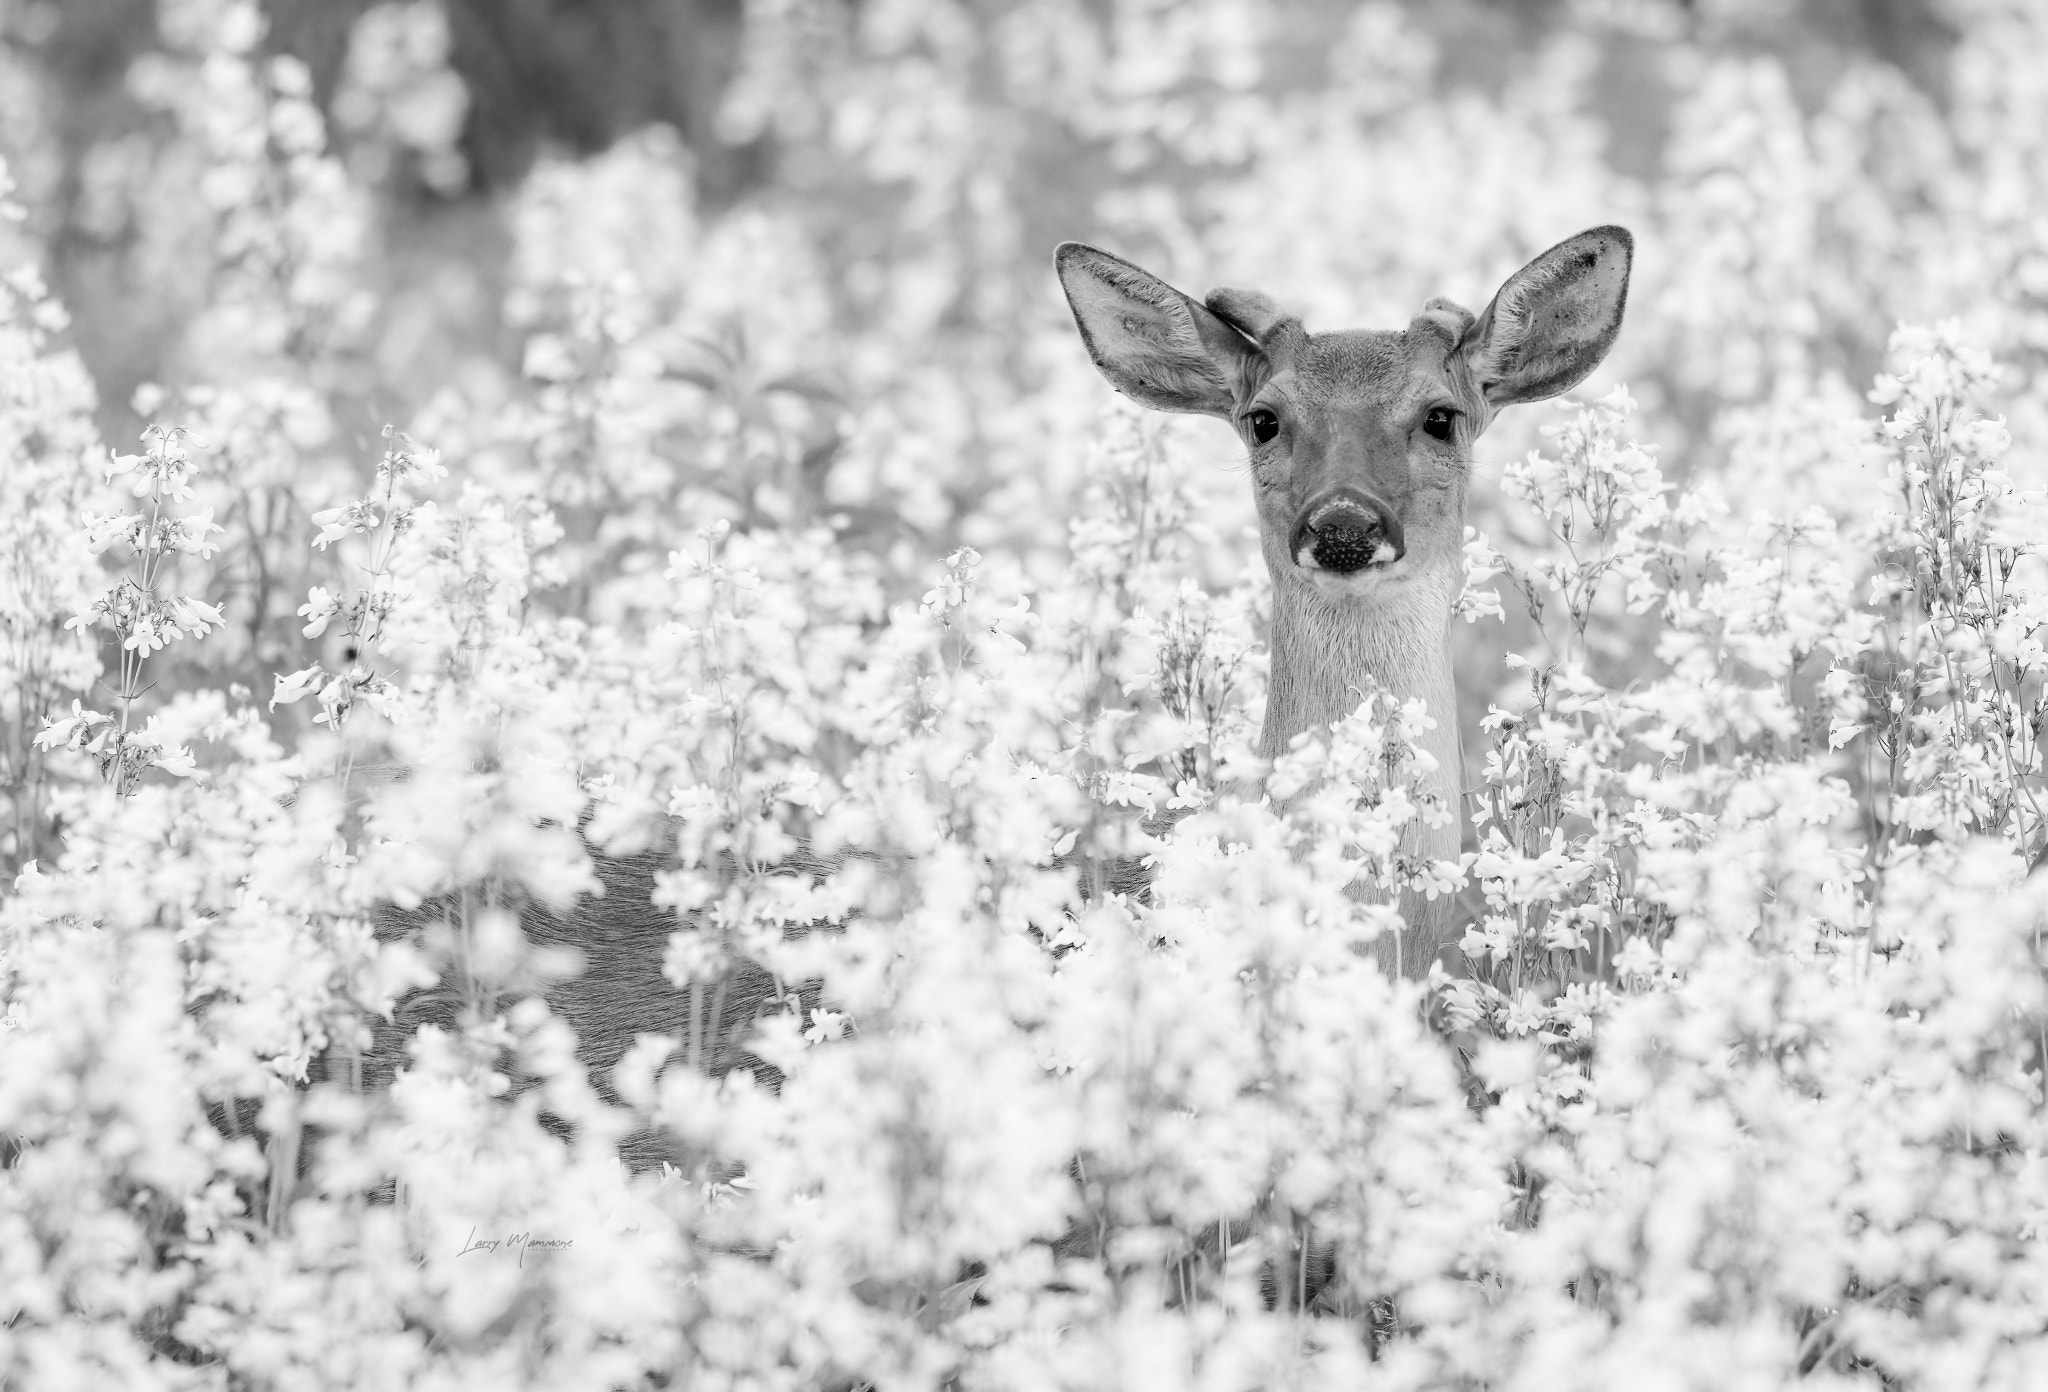 Portrait of deer standing amidst flowers in forest by Larry Mammone on 500px.com